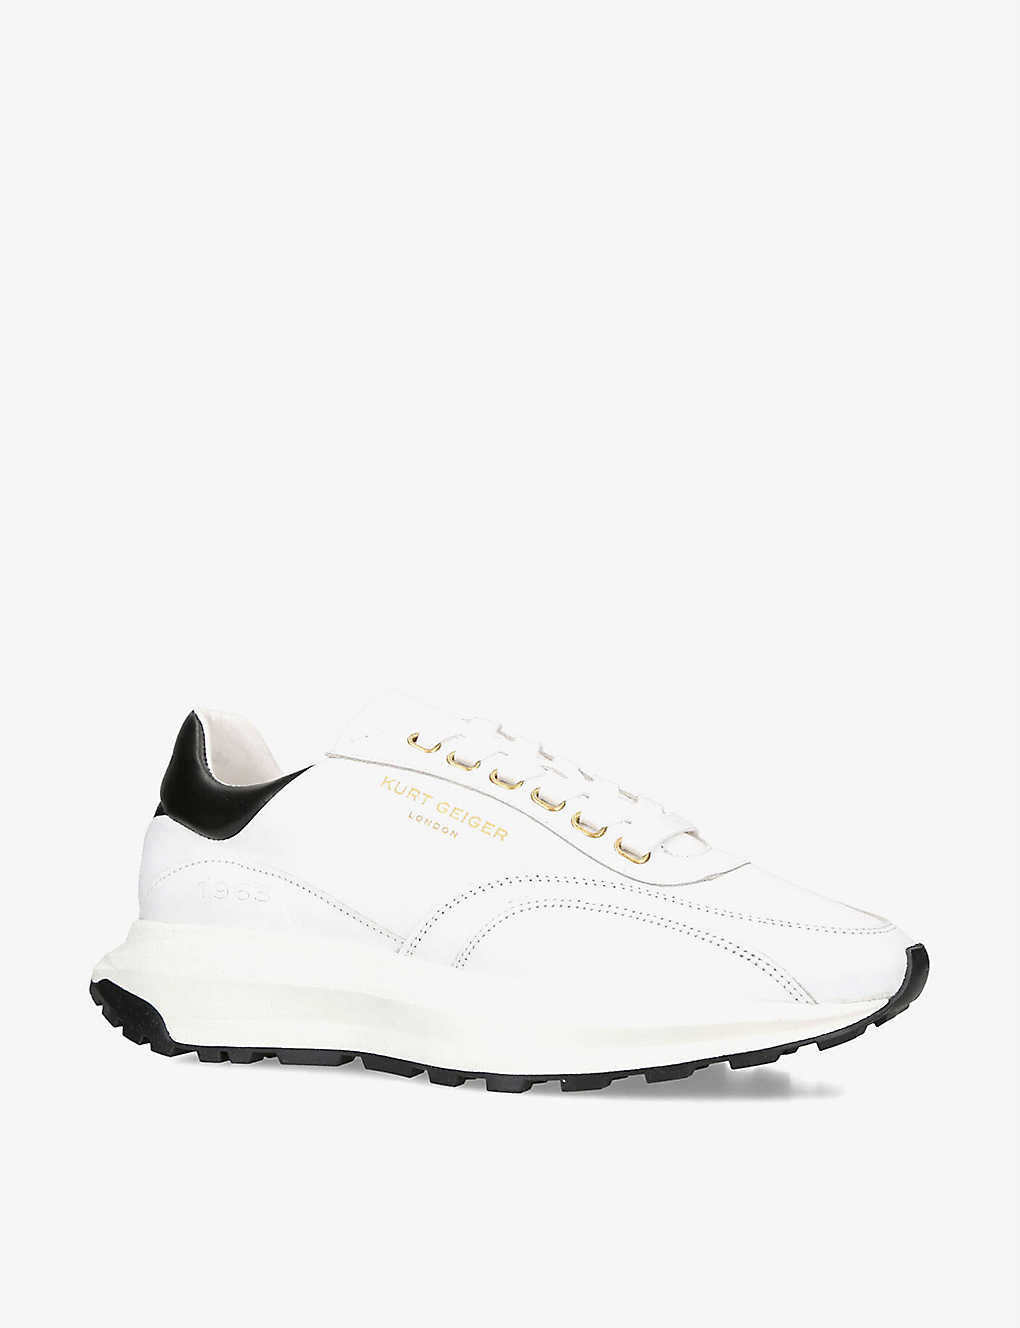 Kurt Geiger Gasper Branded Leather Trainers In White/blk